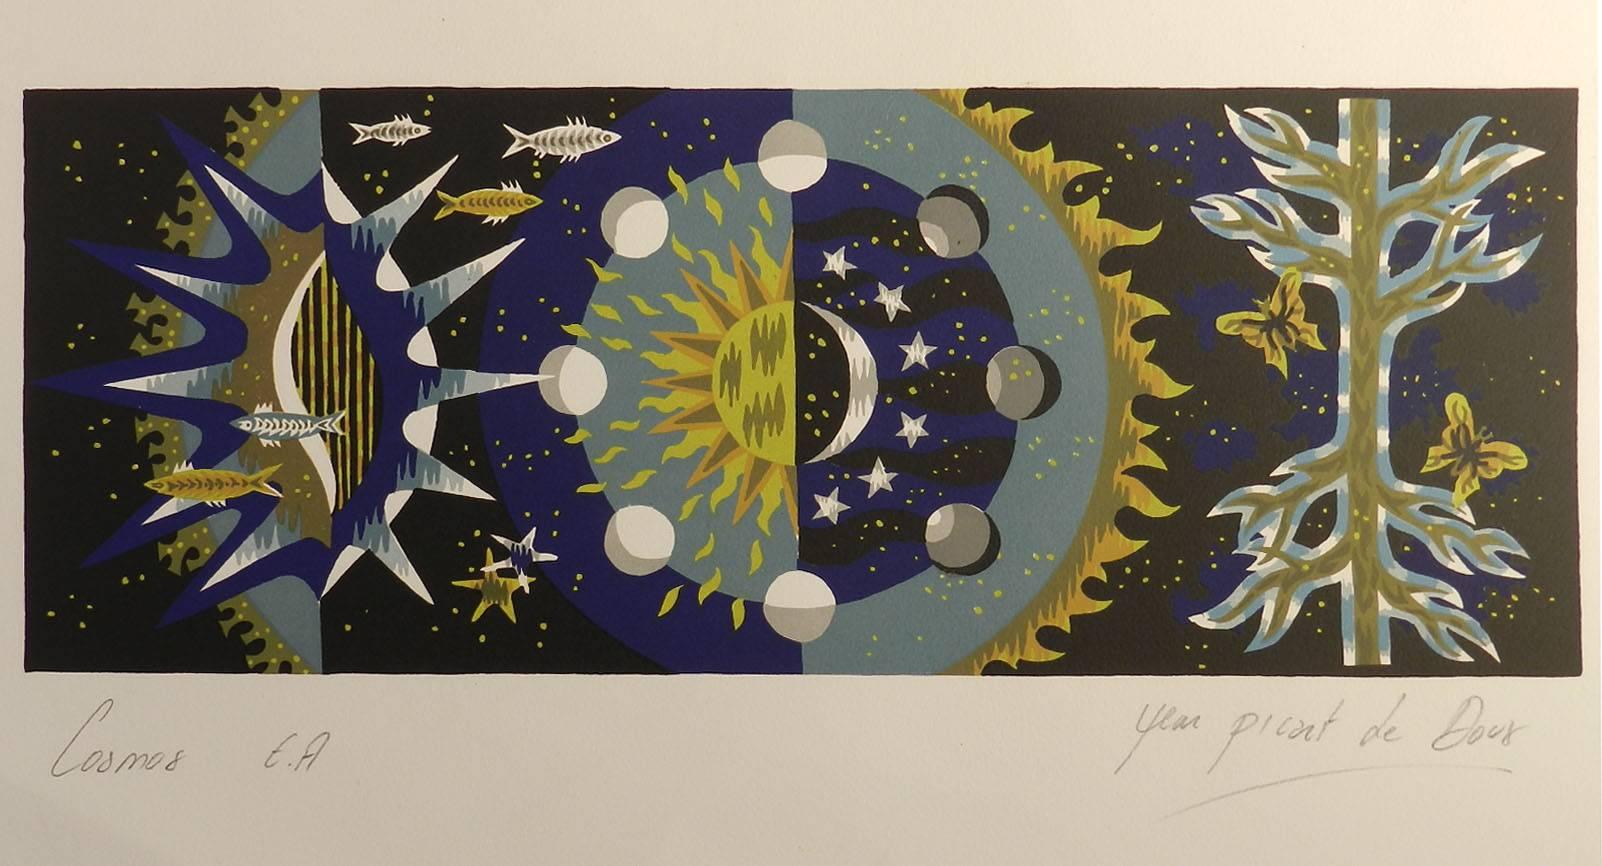 Jean Picart Le Doux signed lithograph “Cosmos”, EA.
Signed in pencil by the artist Jean Picart Le Doux, 1902-1982  French
Artists proof
Cartridge paper unframed
Measures: Actual image 17cms 6.7inches high 47cms 18.5cms wide.